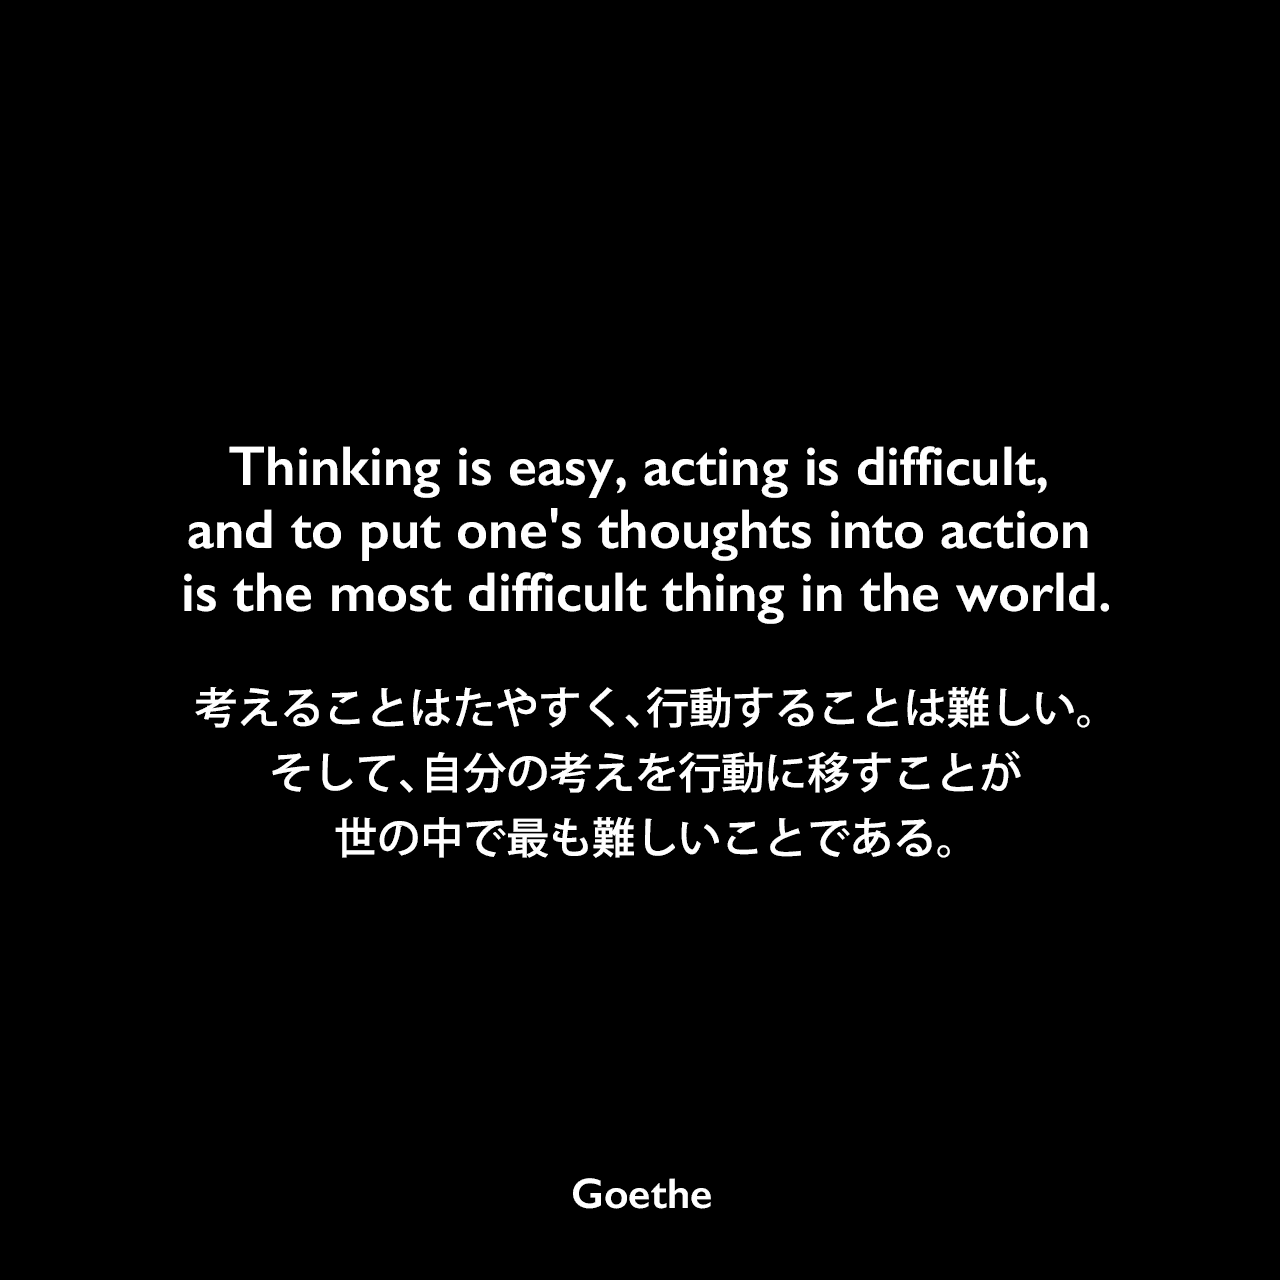 Thinking is easy, acting is difficult, and to put one's thoughts into action is the most difficult thing in the world.考えることはたやすく、行動することは難しい。そして、自分の考えを行動に移すことが世の中で最も難しいことである。Johann Wolfgang von Goethe